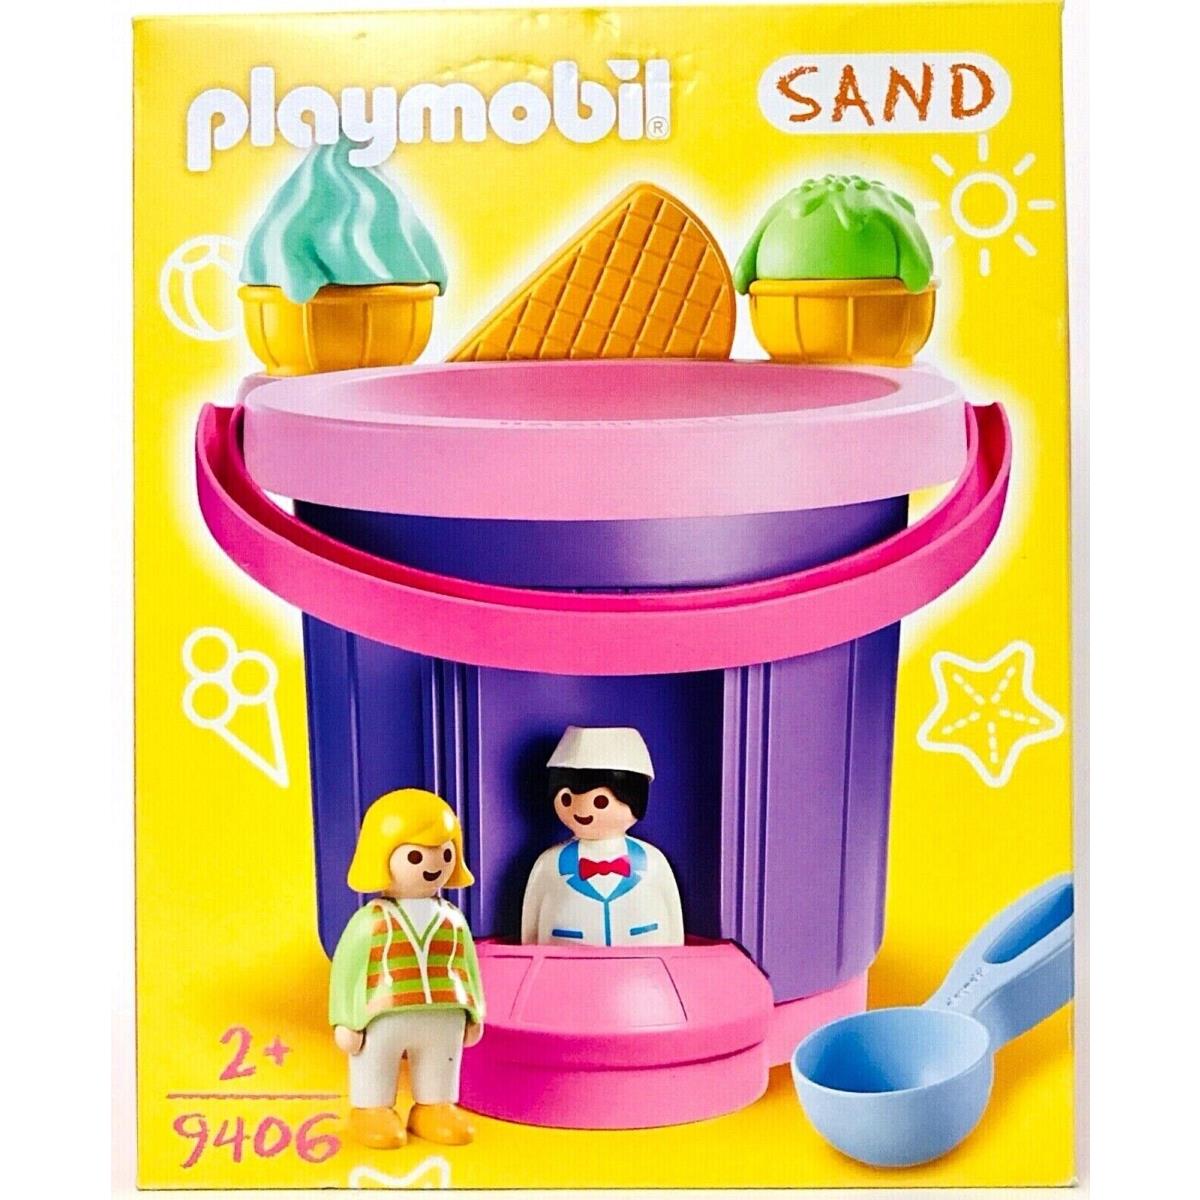 Playmobil 9406 Sand Bucket Playset with 2 Figures Accessories Age 2 Years Up